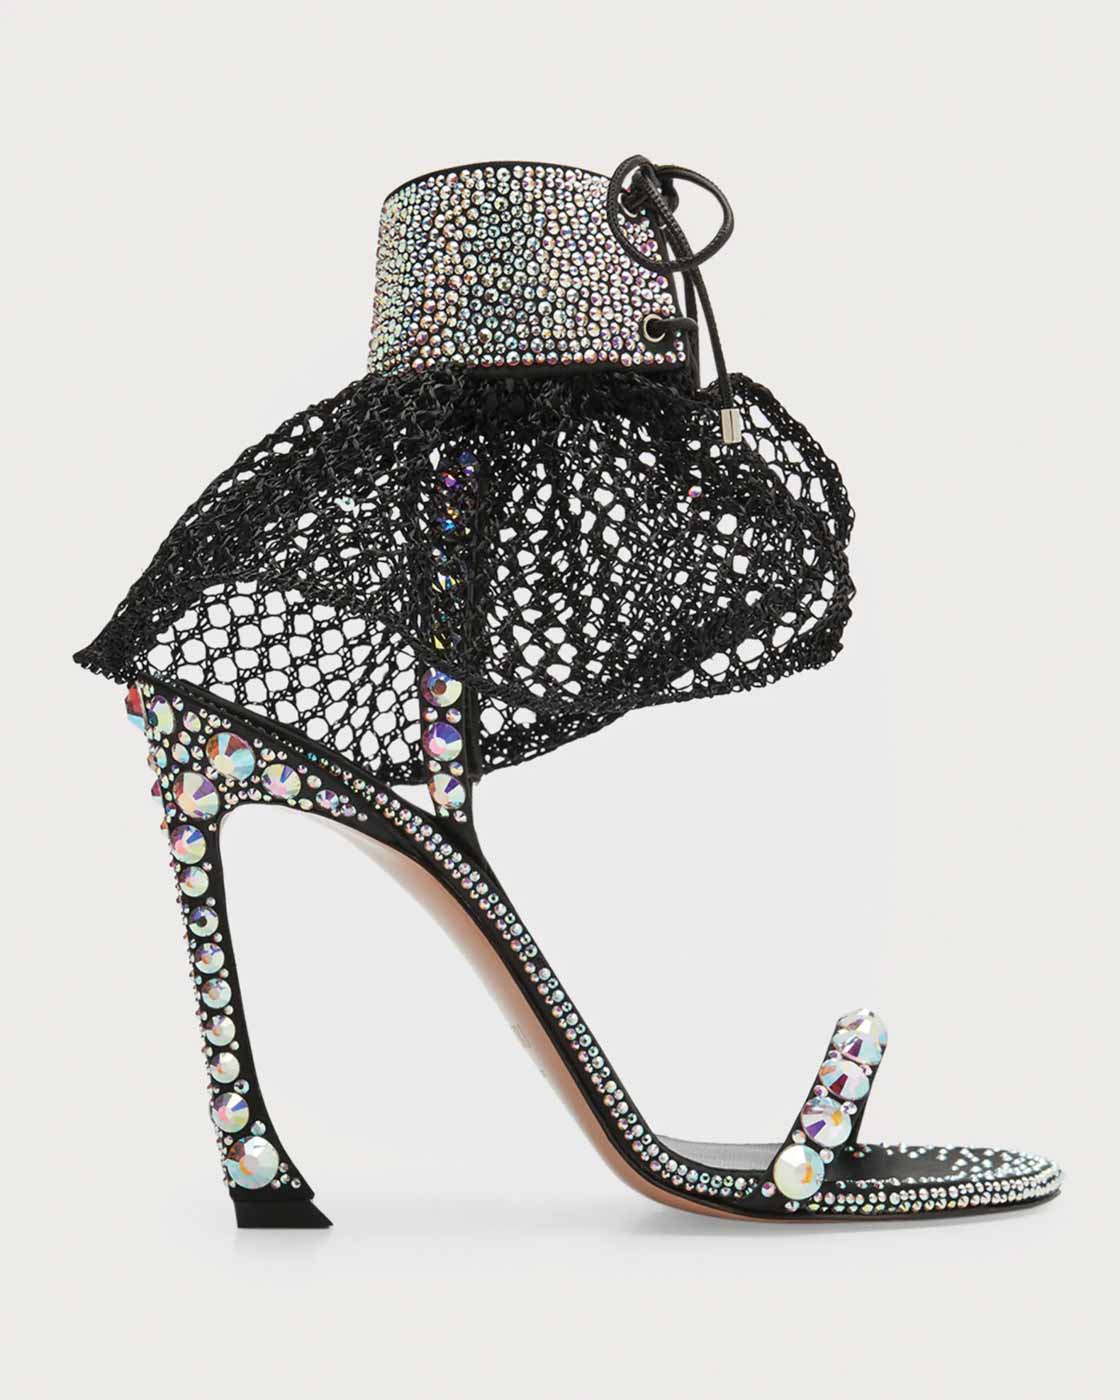 36 Piferi Ginevra Soquette Crystal Two Band Sandals $1,625 Neumanmarcus.com